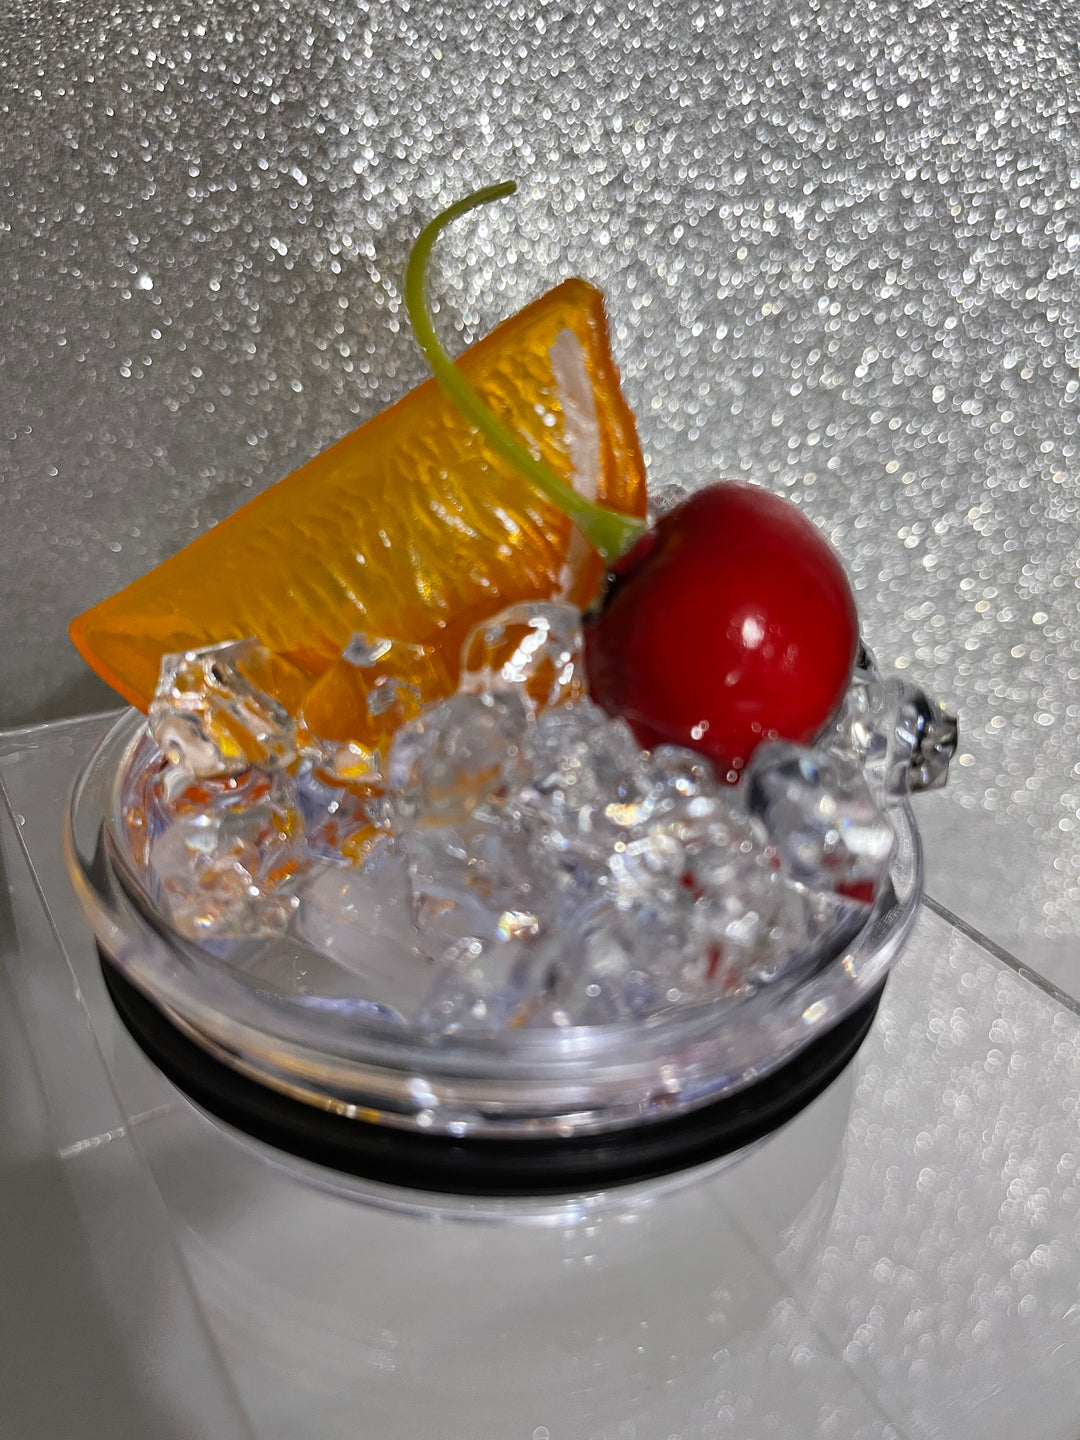 Orange Wedge + Cherry - Fruit Tumbler Toppers - Decorative Lid for Tumblers - Ice Topper Lid